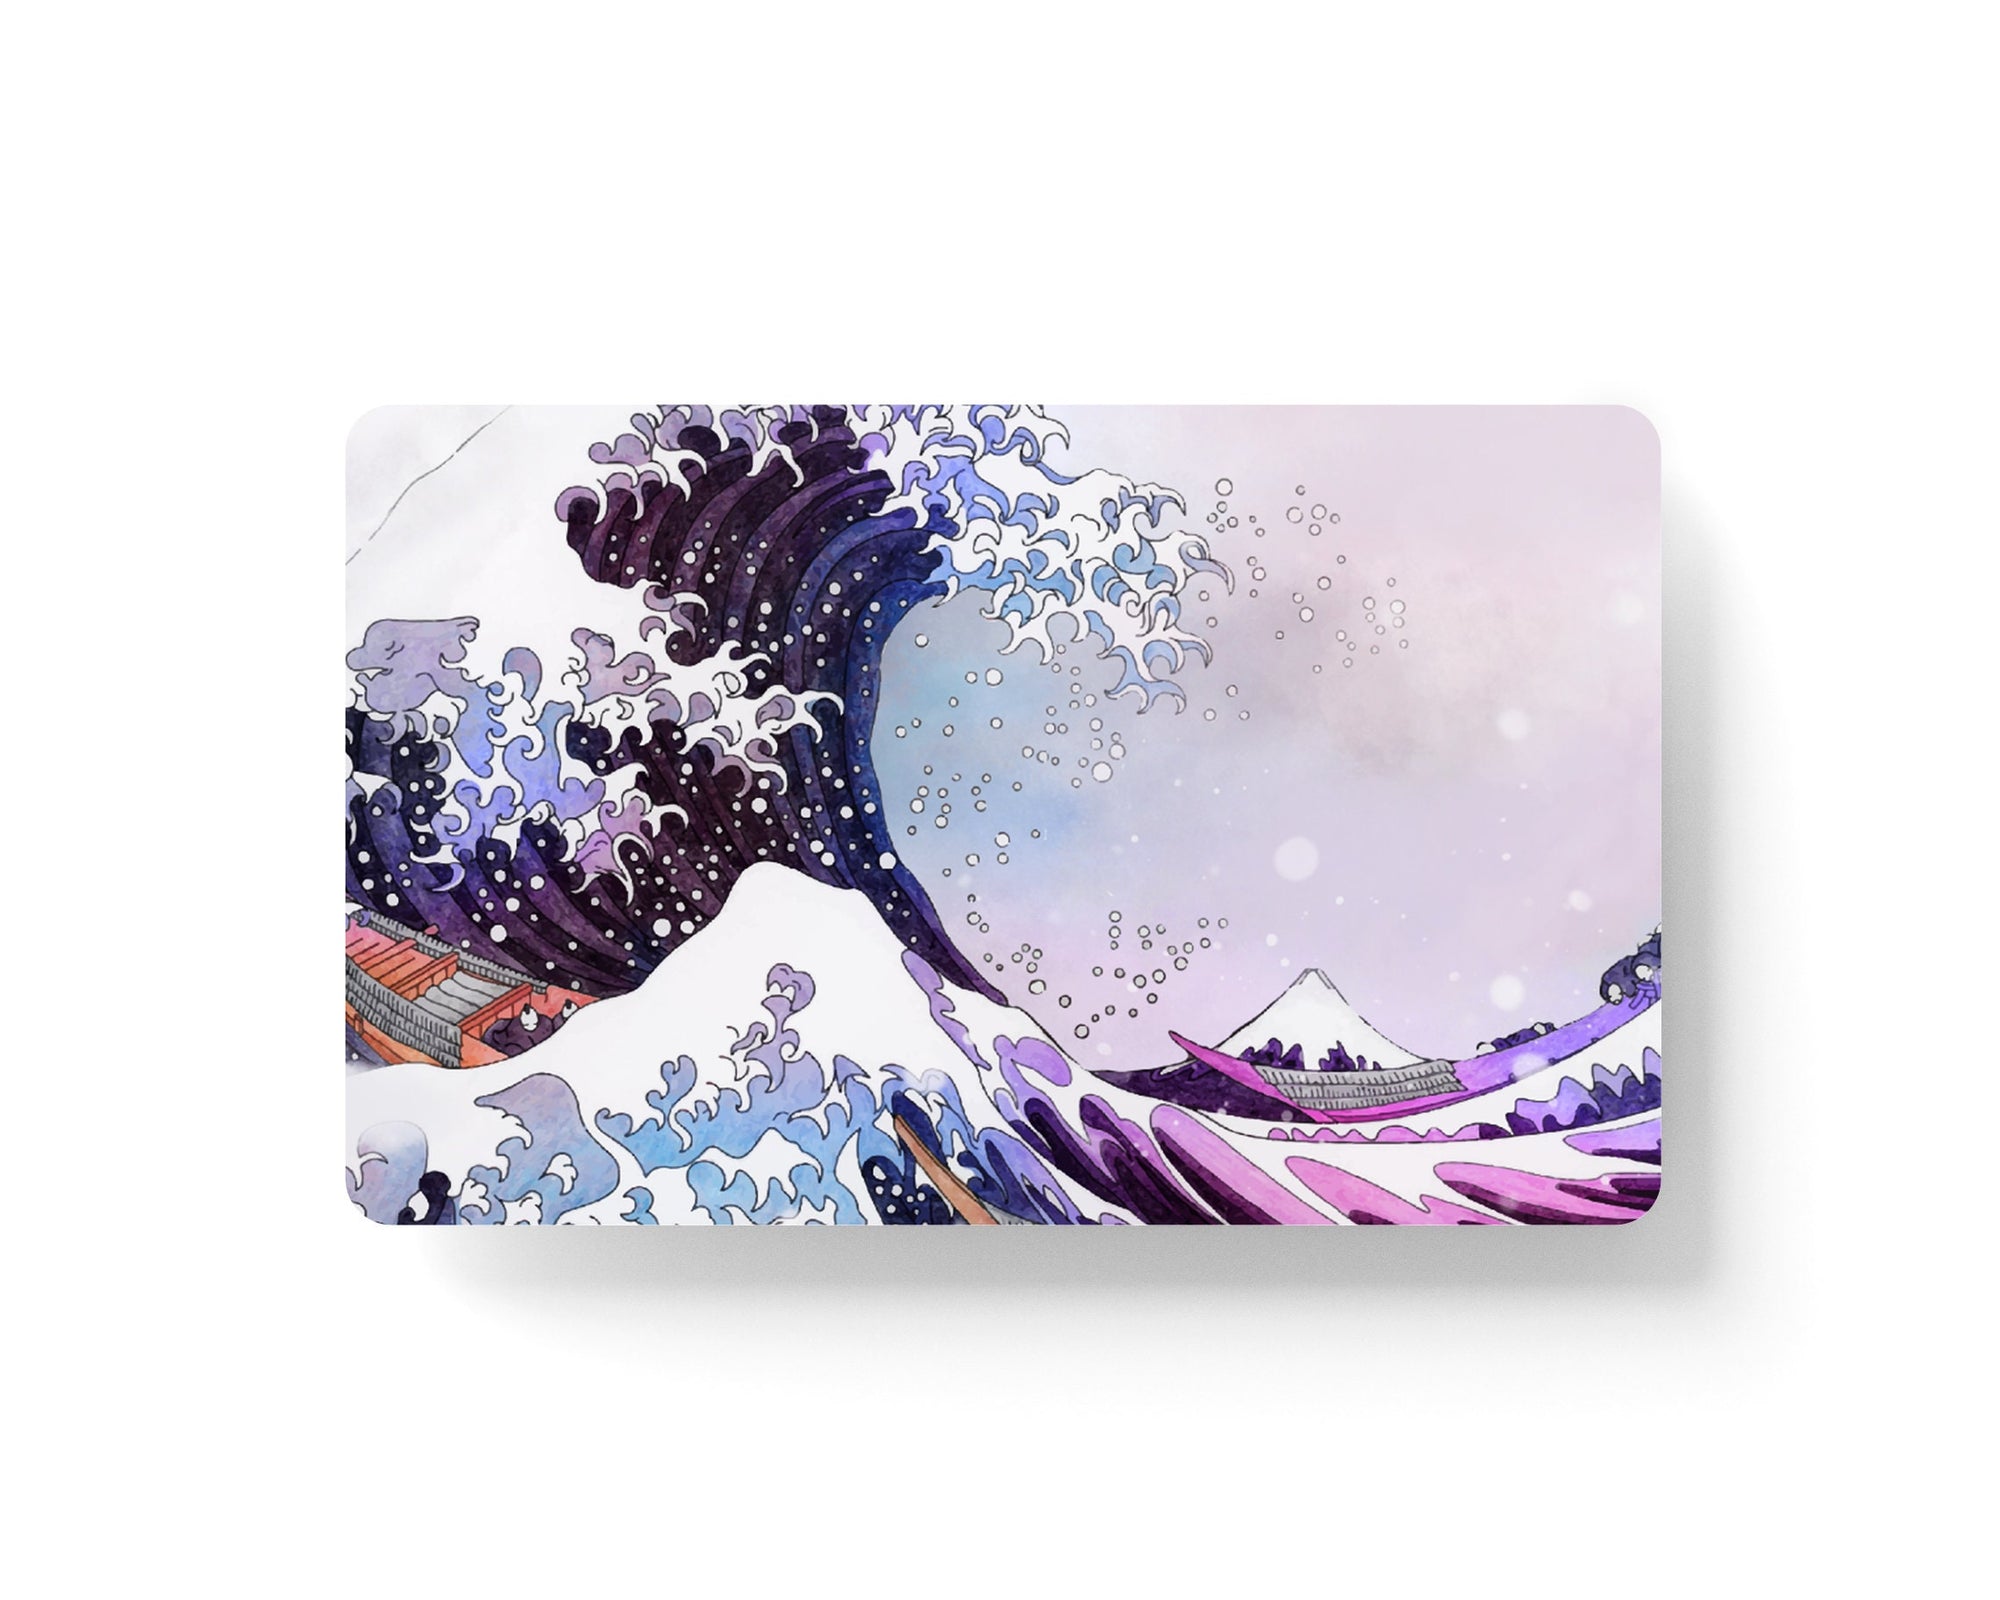 4PCS Credit Card Skin Clouds, Includes 4 different variations for